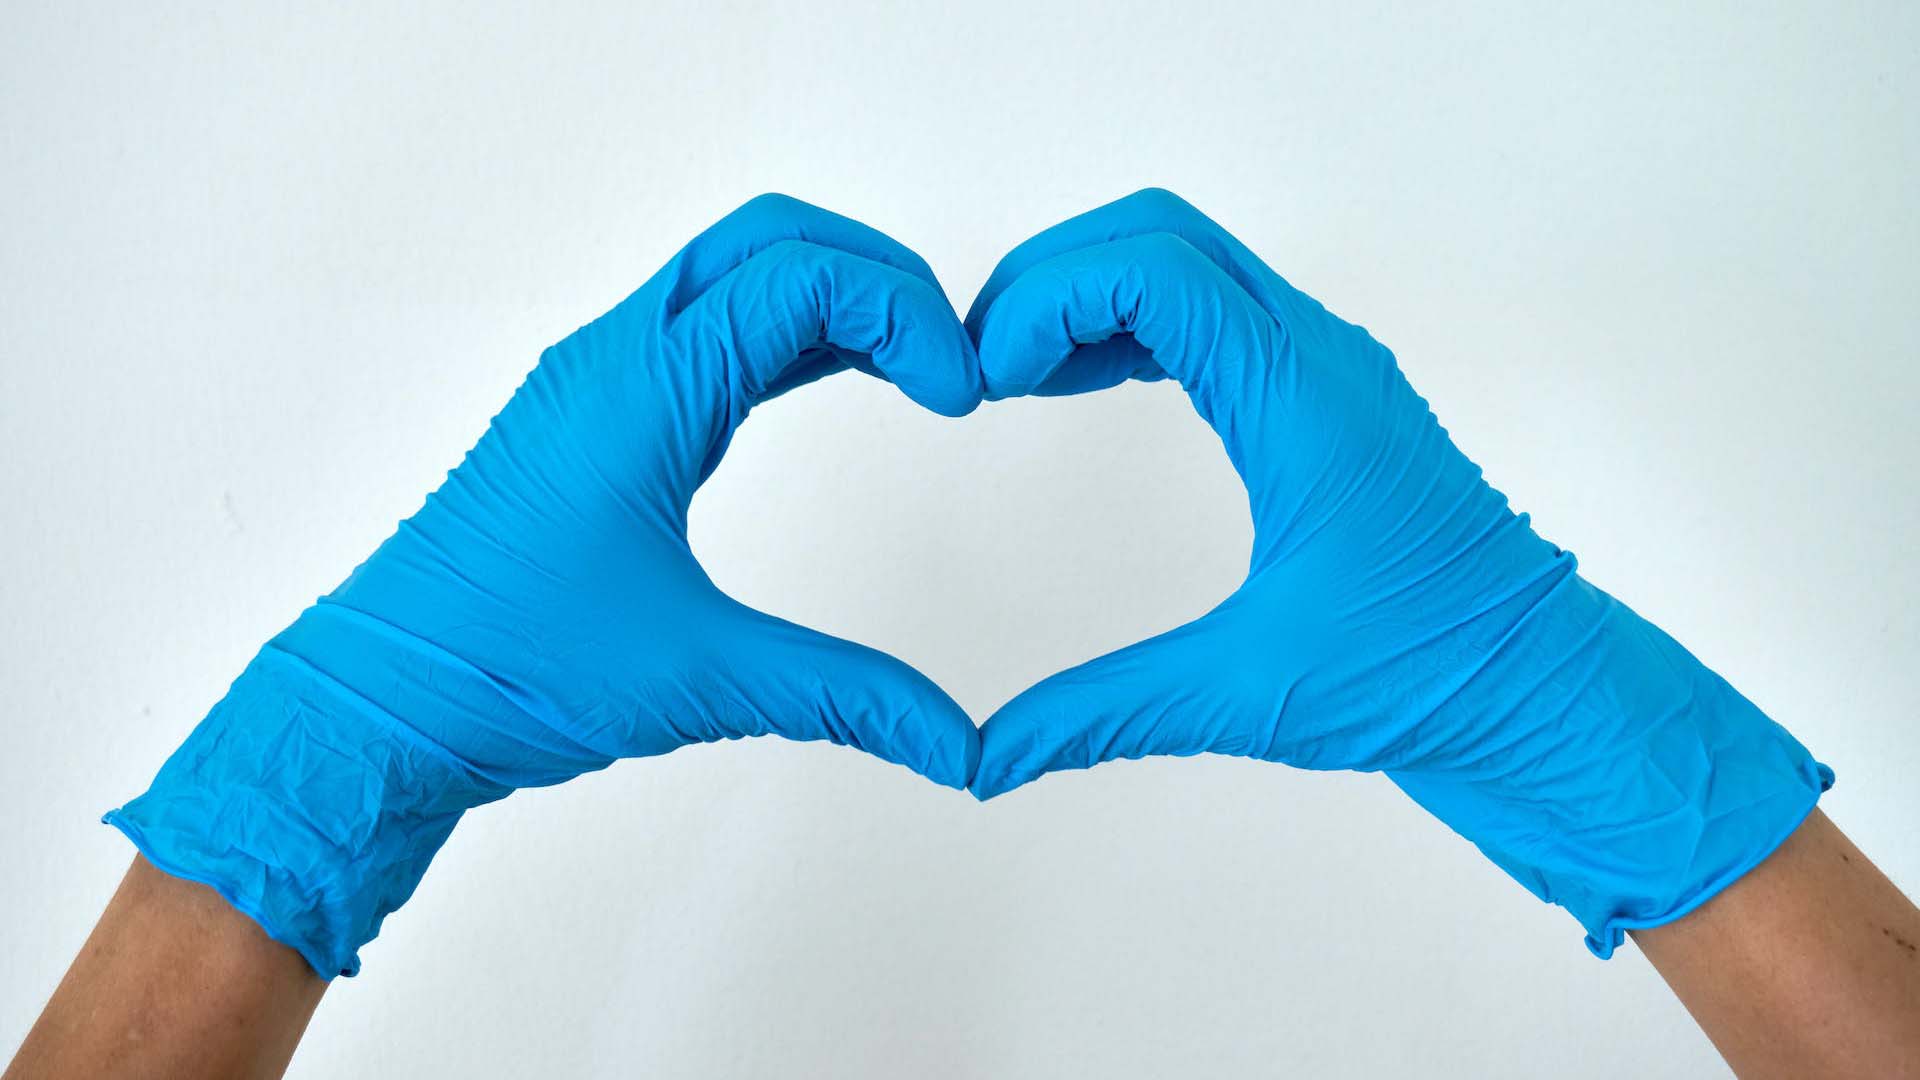 person wearing blue nitrile gloves making a heart sign 